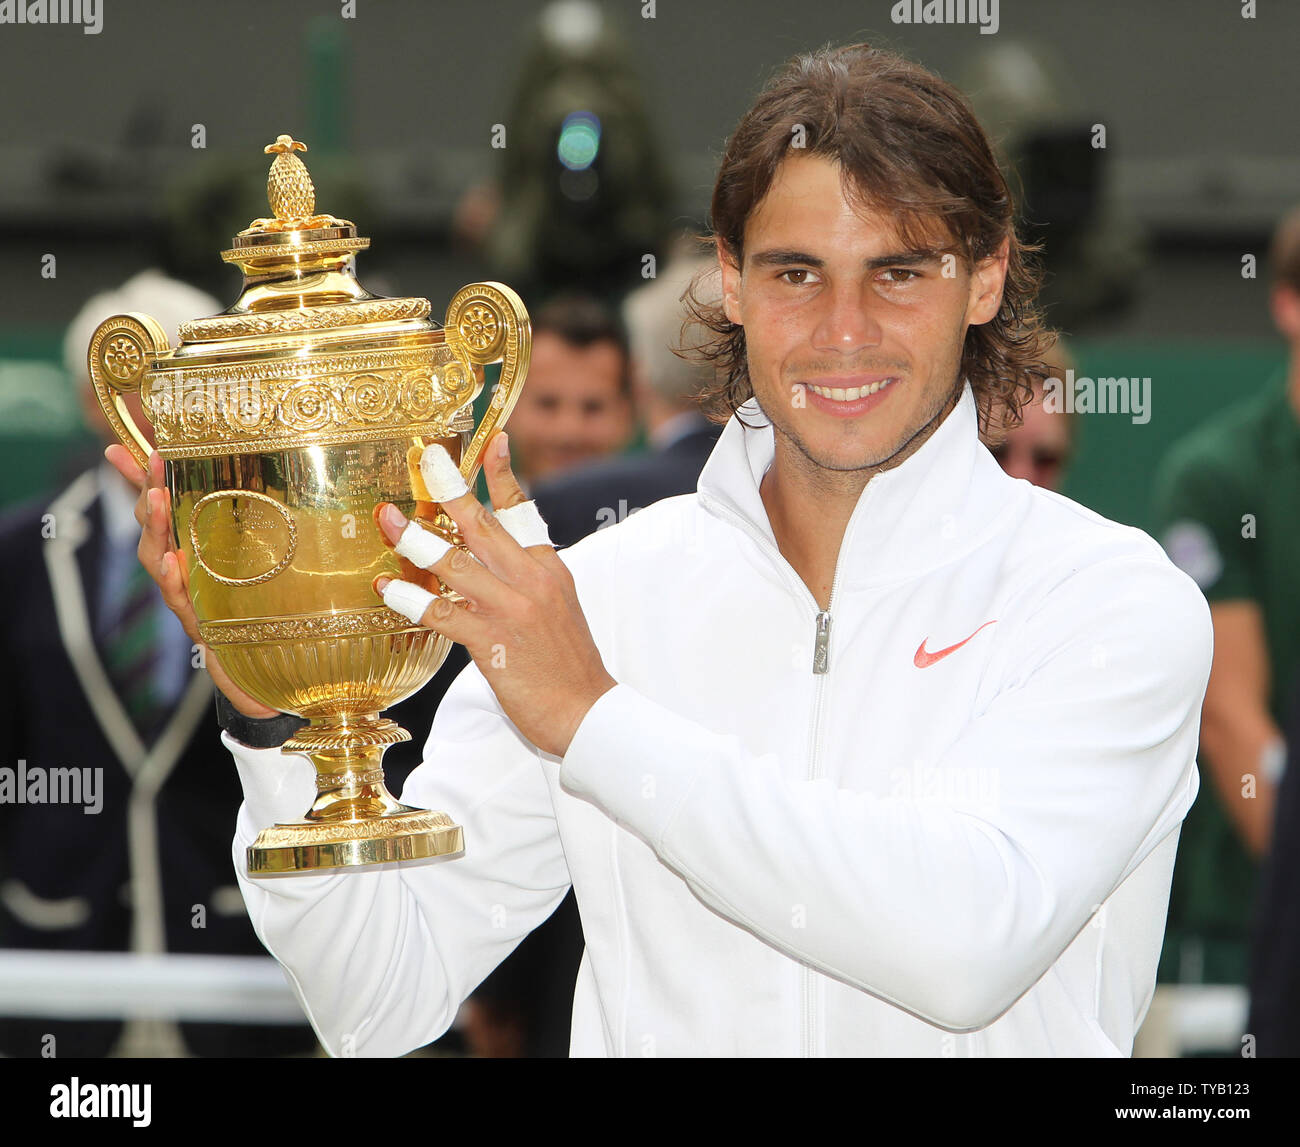 Spain's Rafael Nadal holds the the Wimbledon men's singles trophy after  victory over Czech Thomas Berdych at the Wimbledon championships in  Wimbledon on July 4, 2010. UPI/Hugo Philpott Stock Photo - Alamy